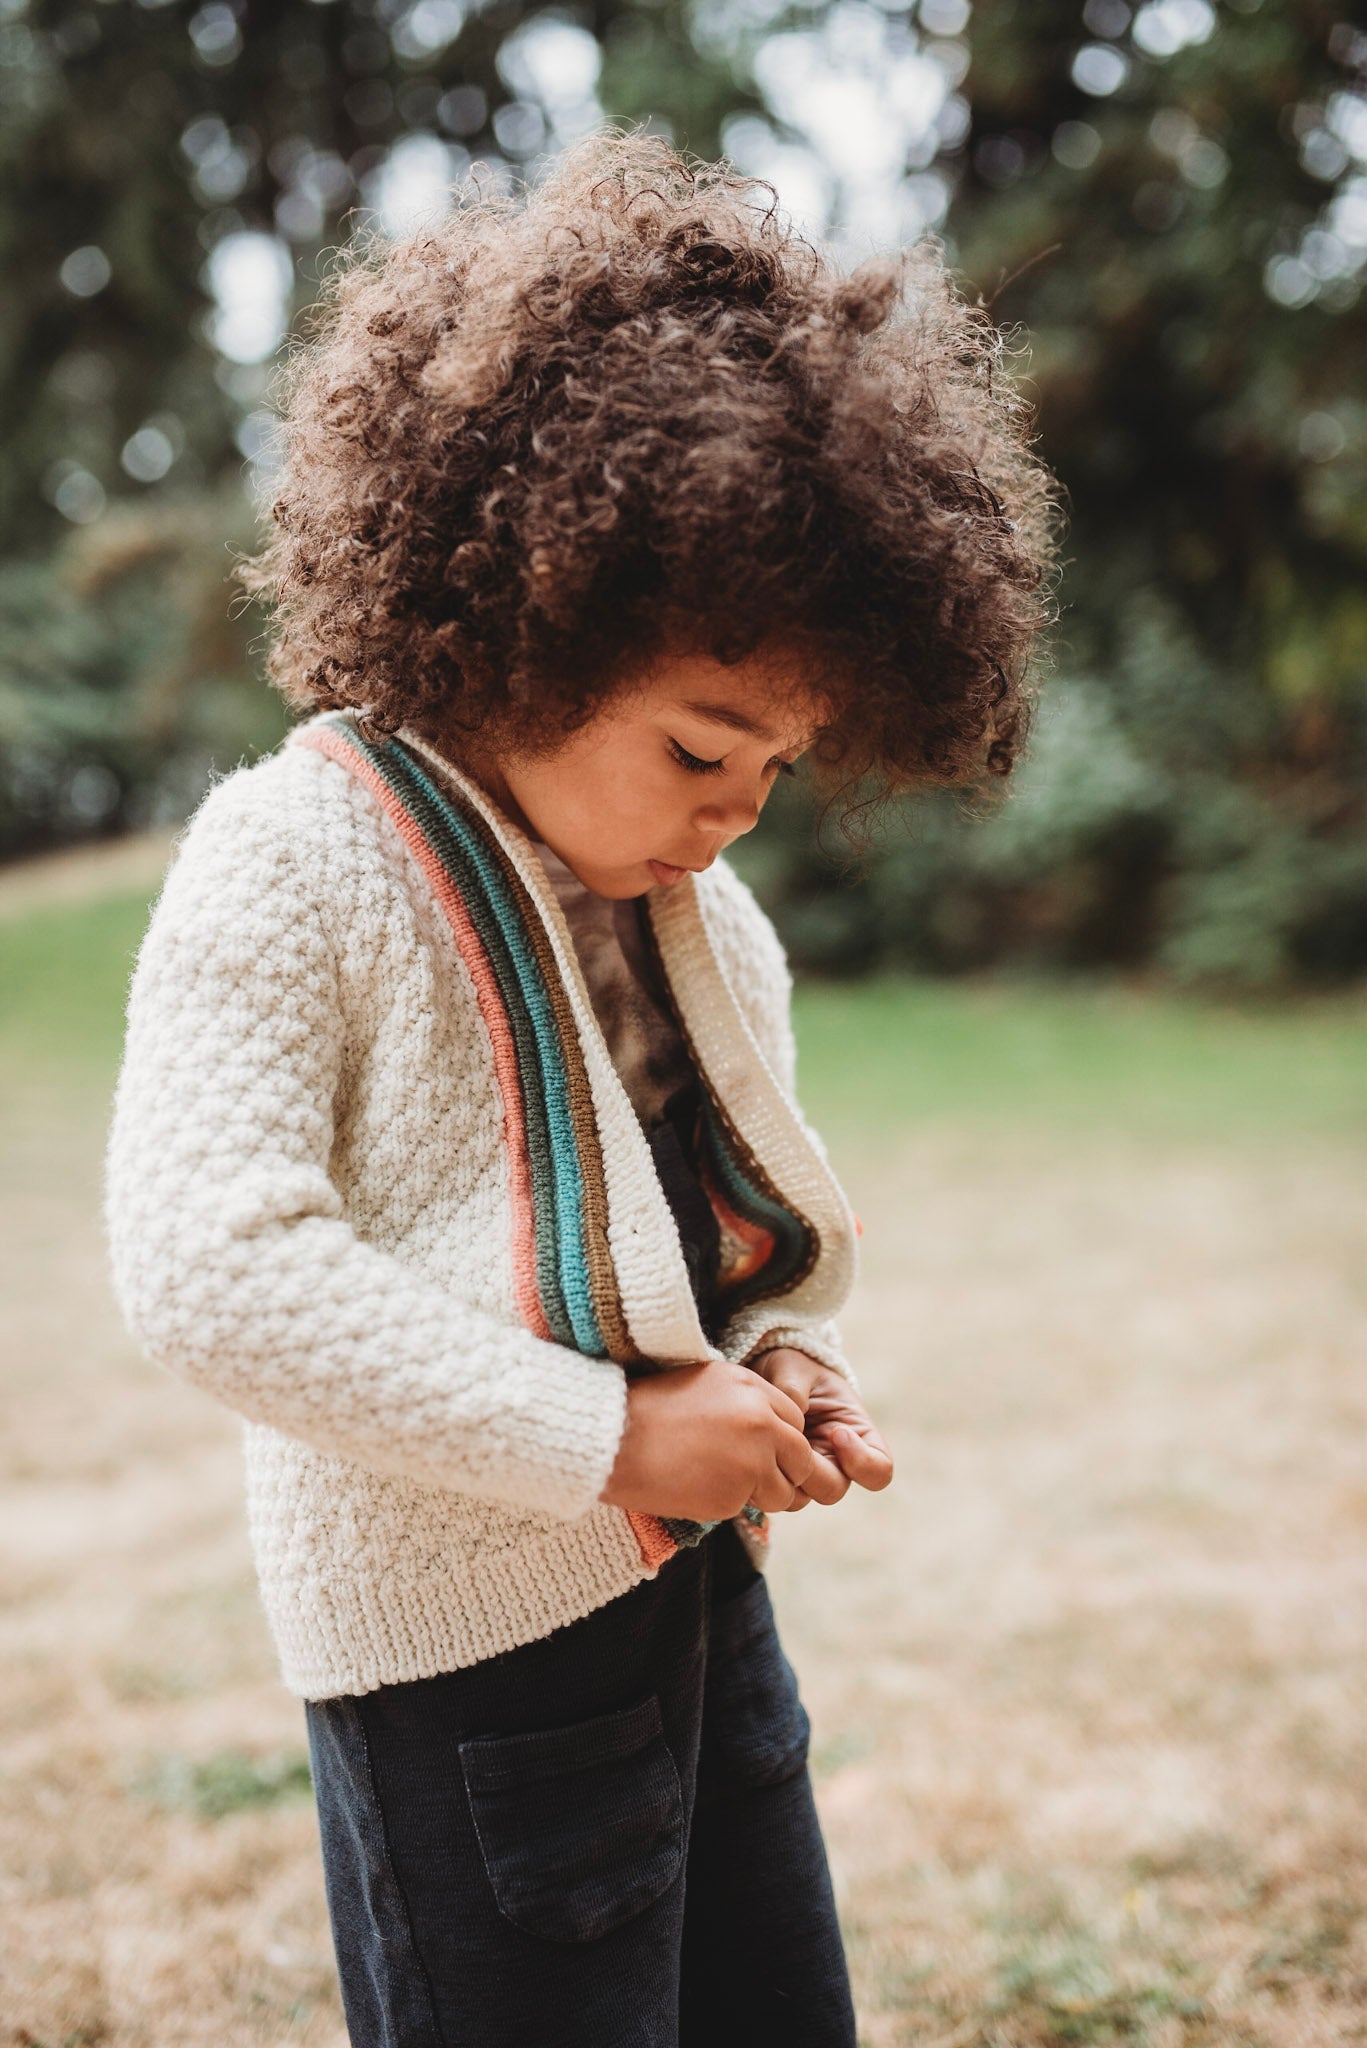 A young boy with curly brown hair, seen from a 3/4 angle, buttons up hand knit jacket, knit in cream with brown, green, blue, and orange plackets around the button band.